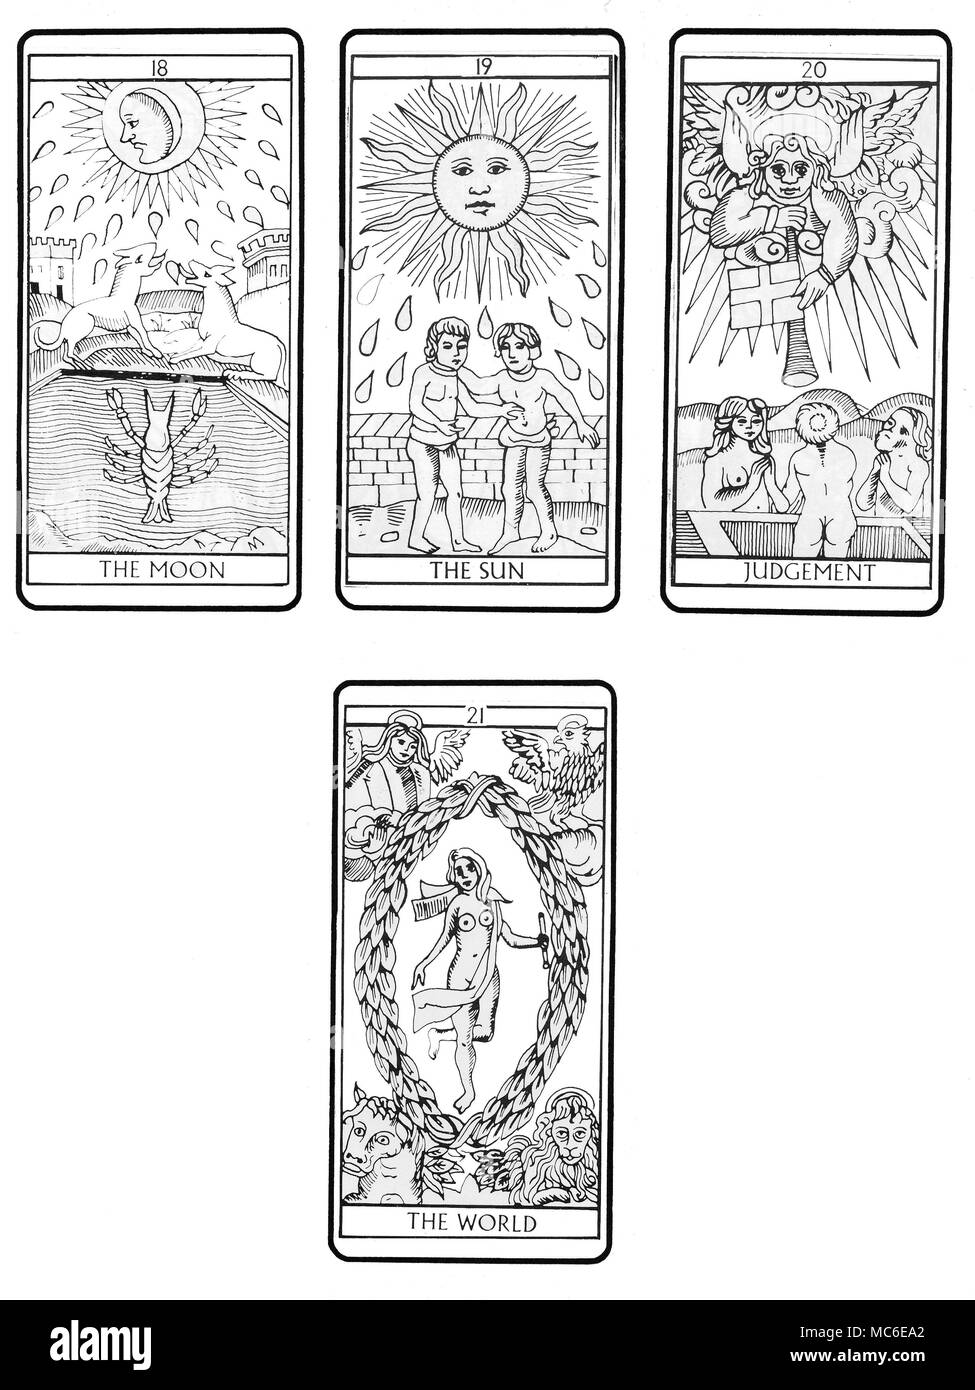 TAROT CARDS - MARSEILLES DECK The fourth and final batch (of four) in the sequence of 22 Tarot cards (according to the traditional Marseilles design), from the eighteenth card (The Moon), through The Sun card, The Judgement and The World. The remaining sequences are available, in batches of 6. Stock Photo